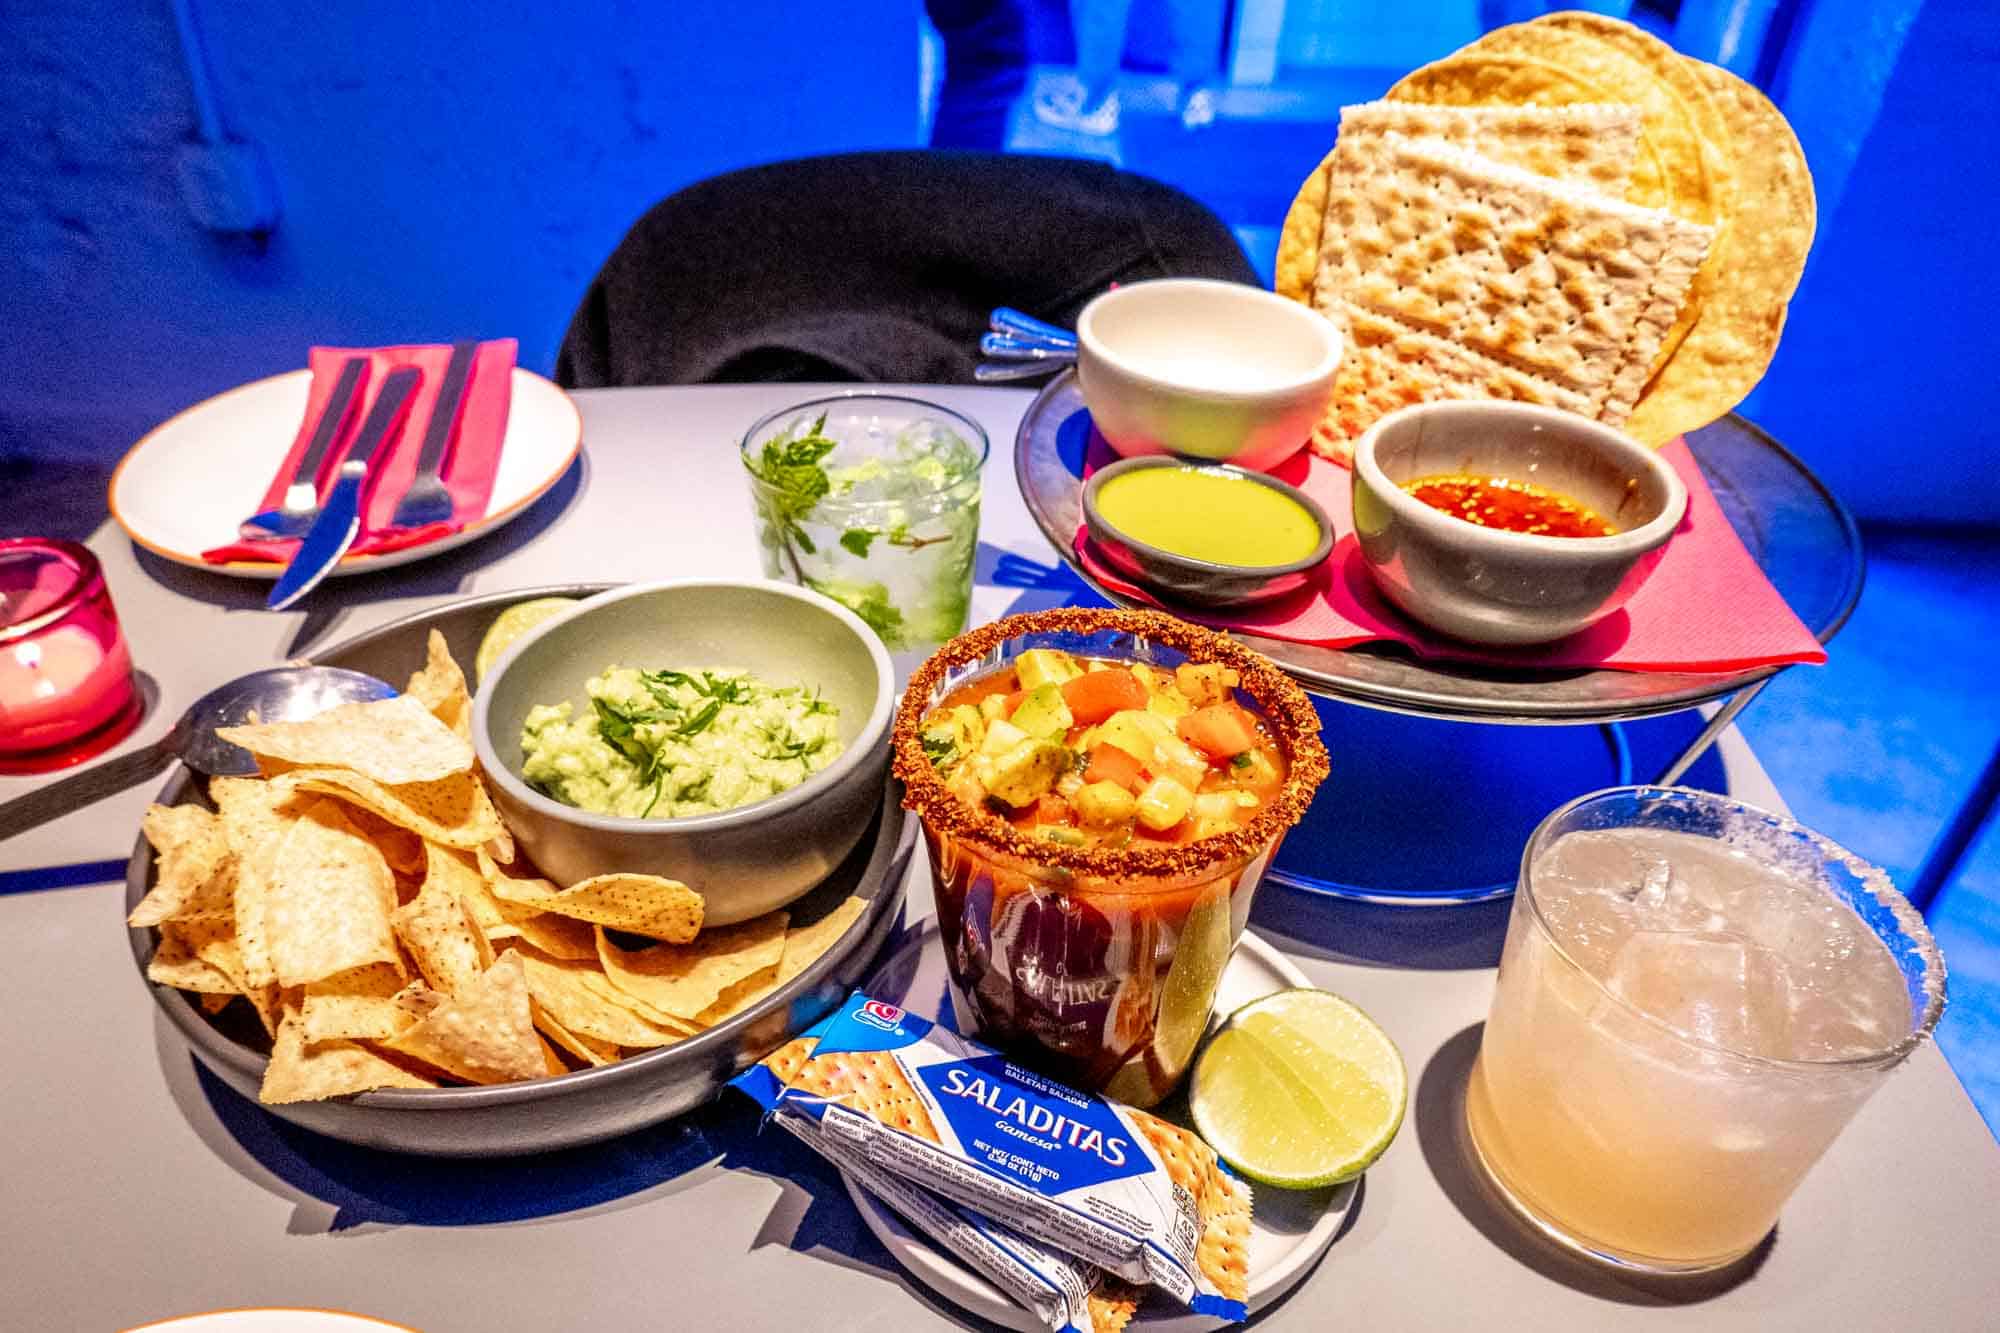 Table with cocktails, tortilla chips and guacamole, ceviche, and other Mexican food